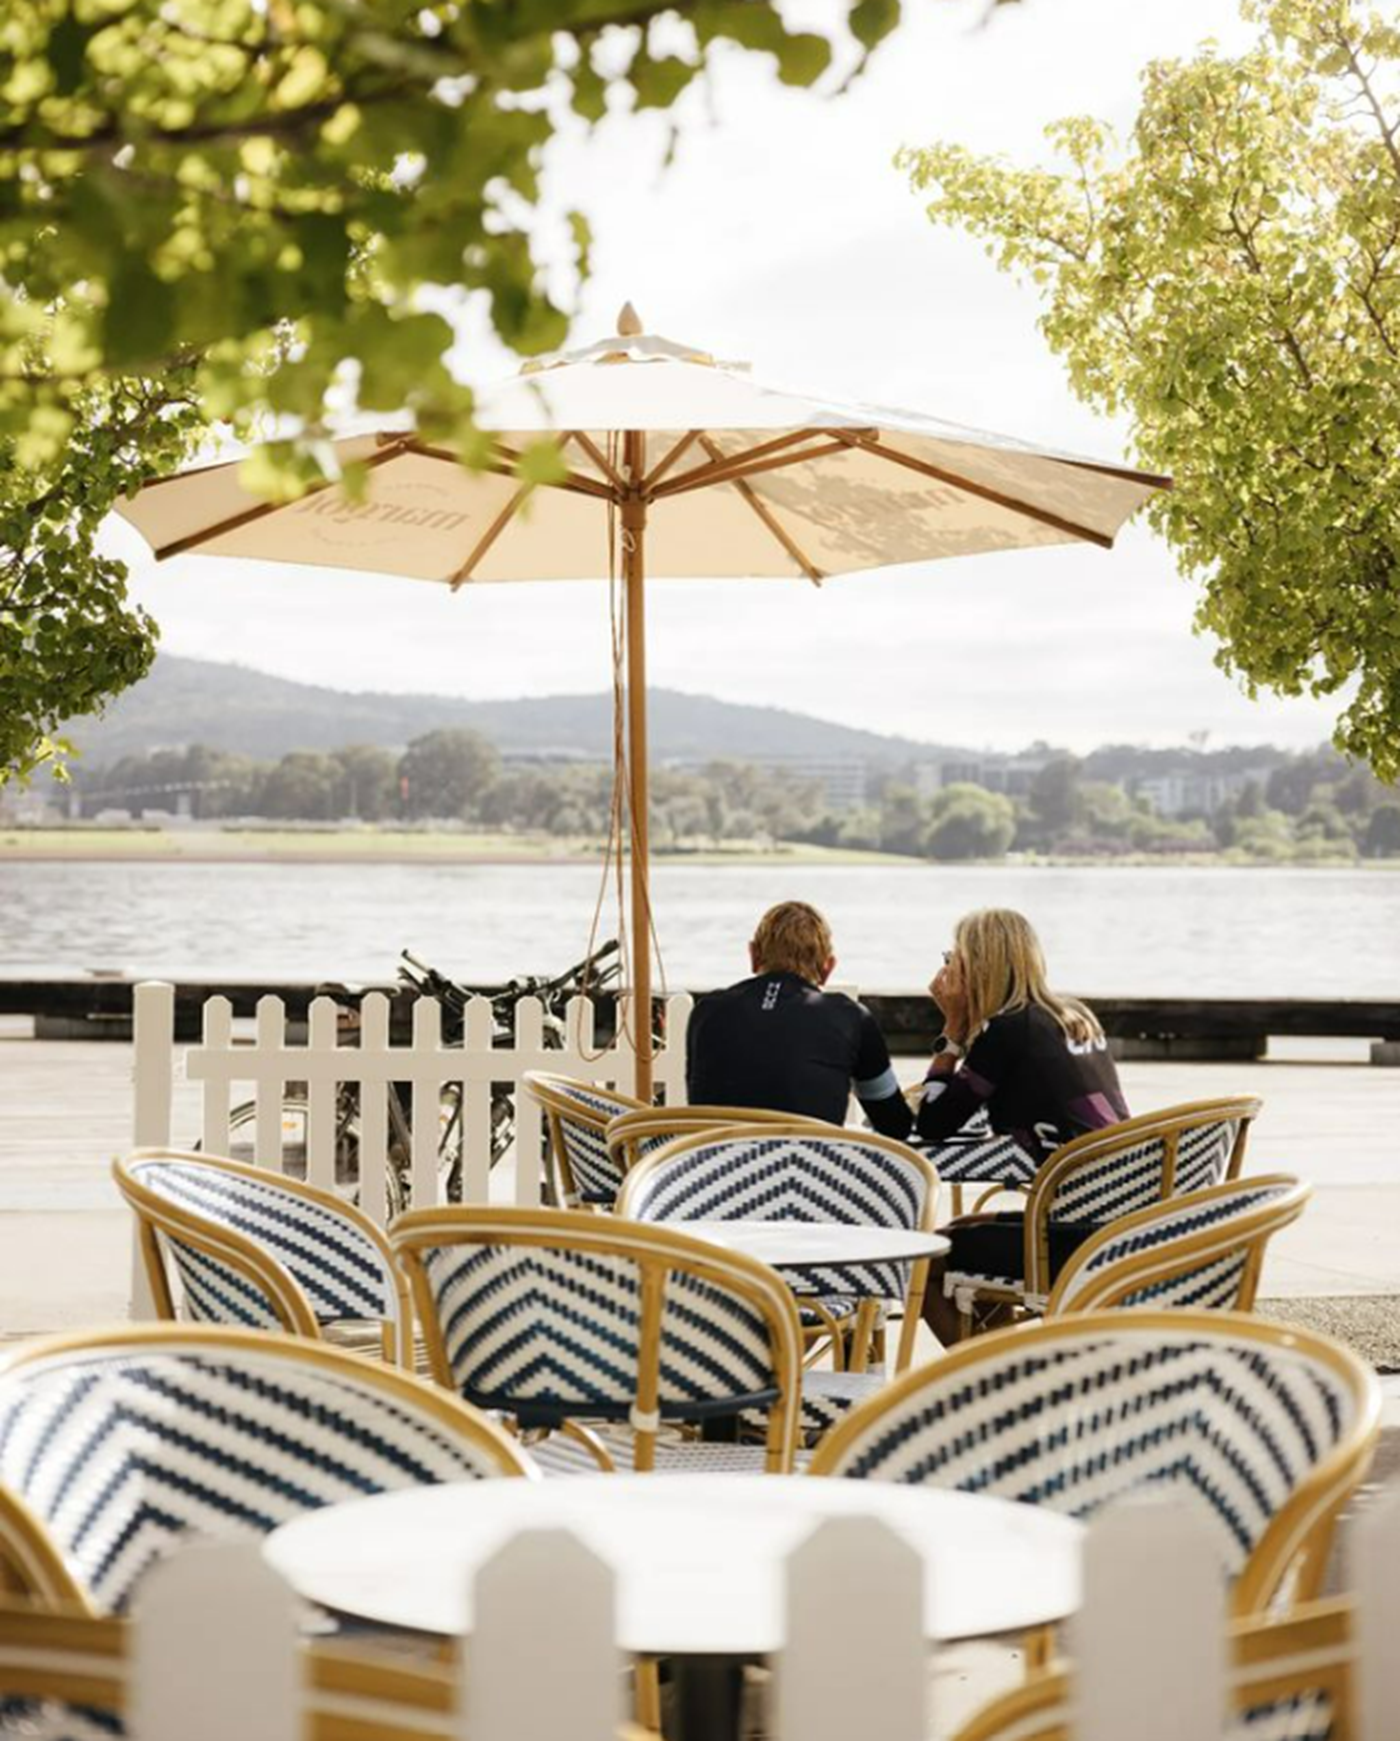 Two bike riders stopping by a lakeside cafe with blue and white cafe seating, taking in the views of the lake 